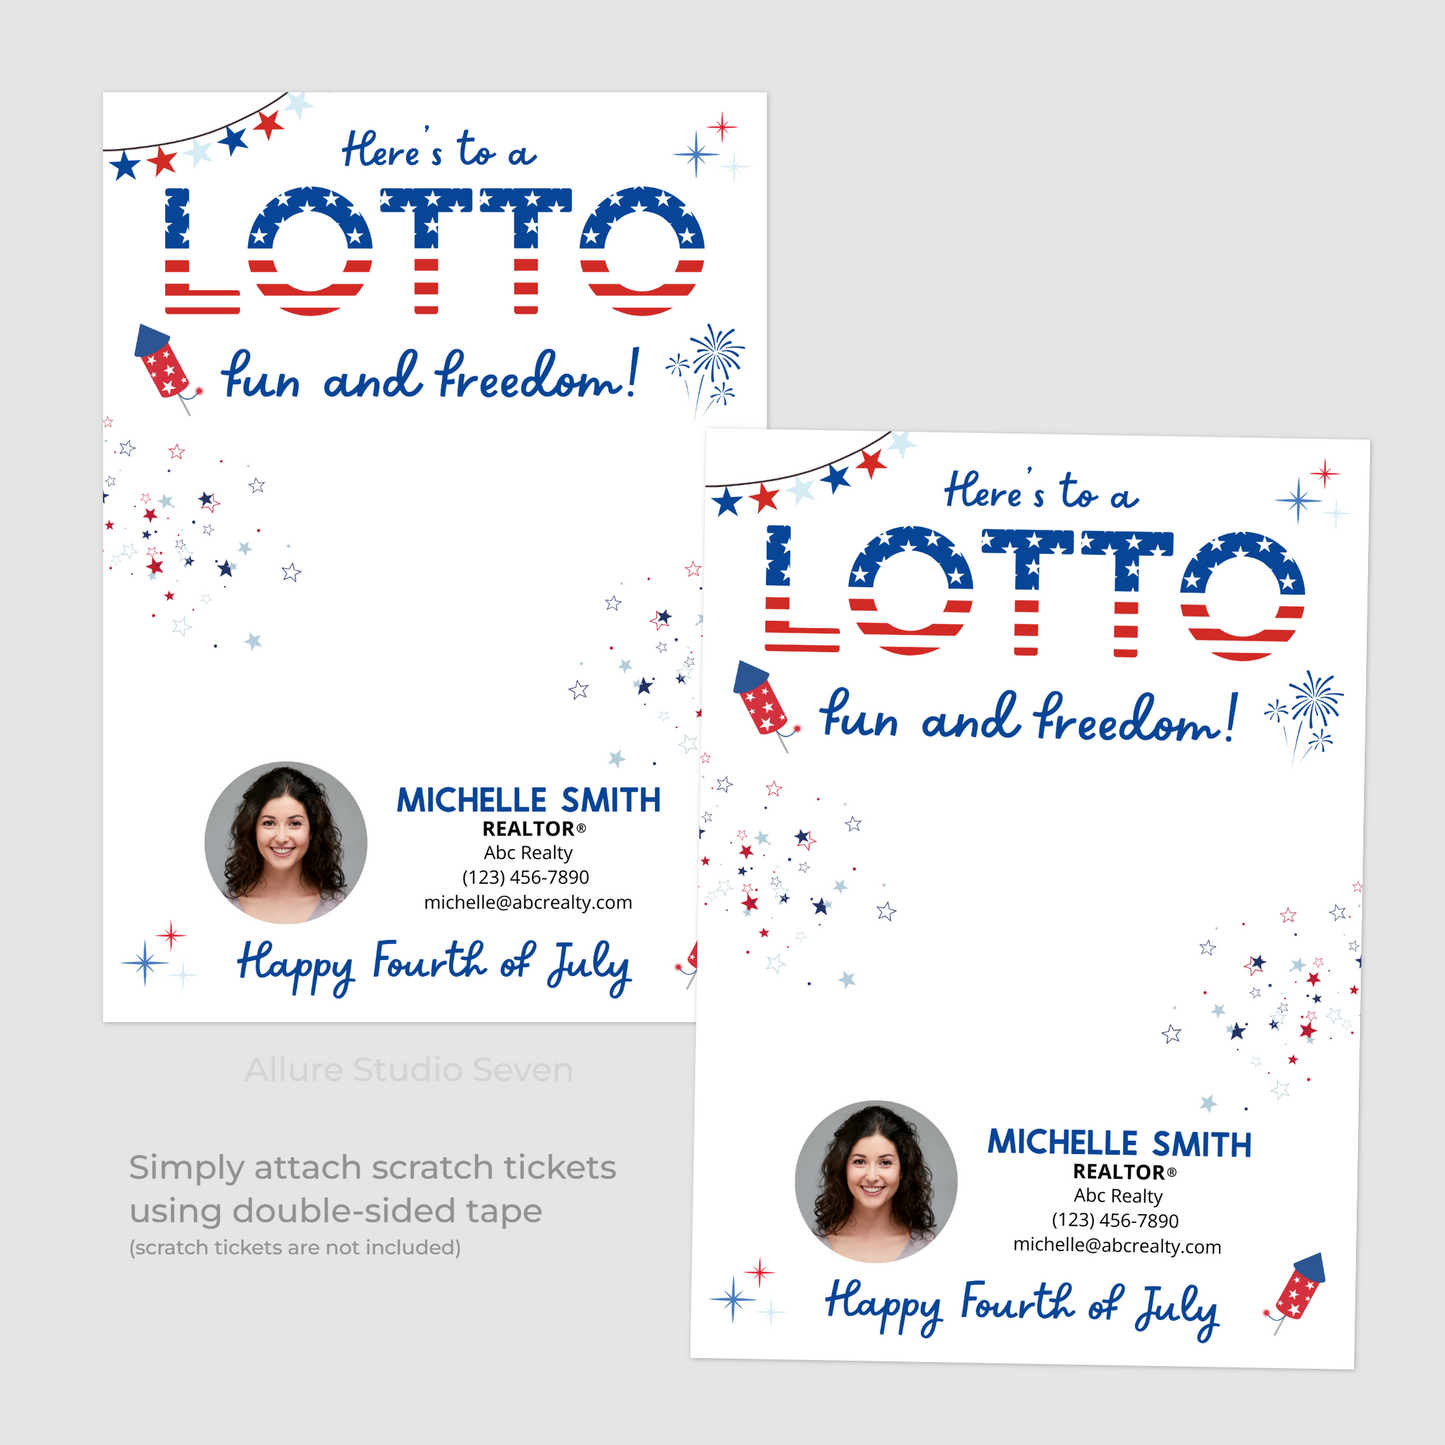 Here's To A Lotto Fun and Freedom Lotto Cards